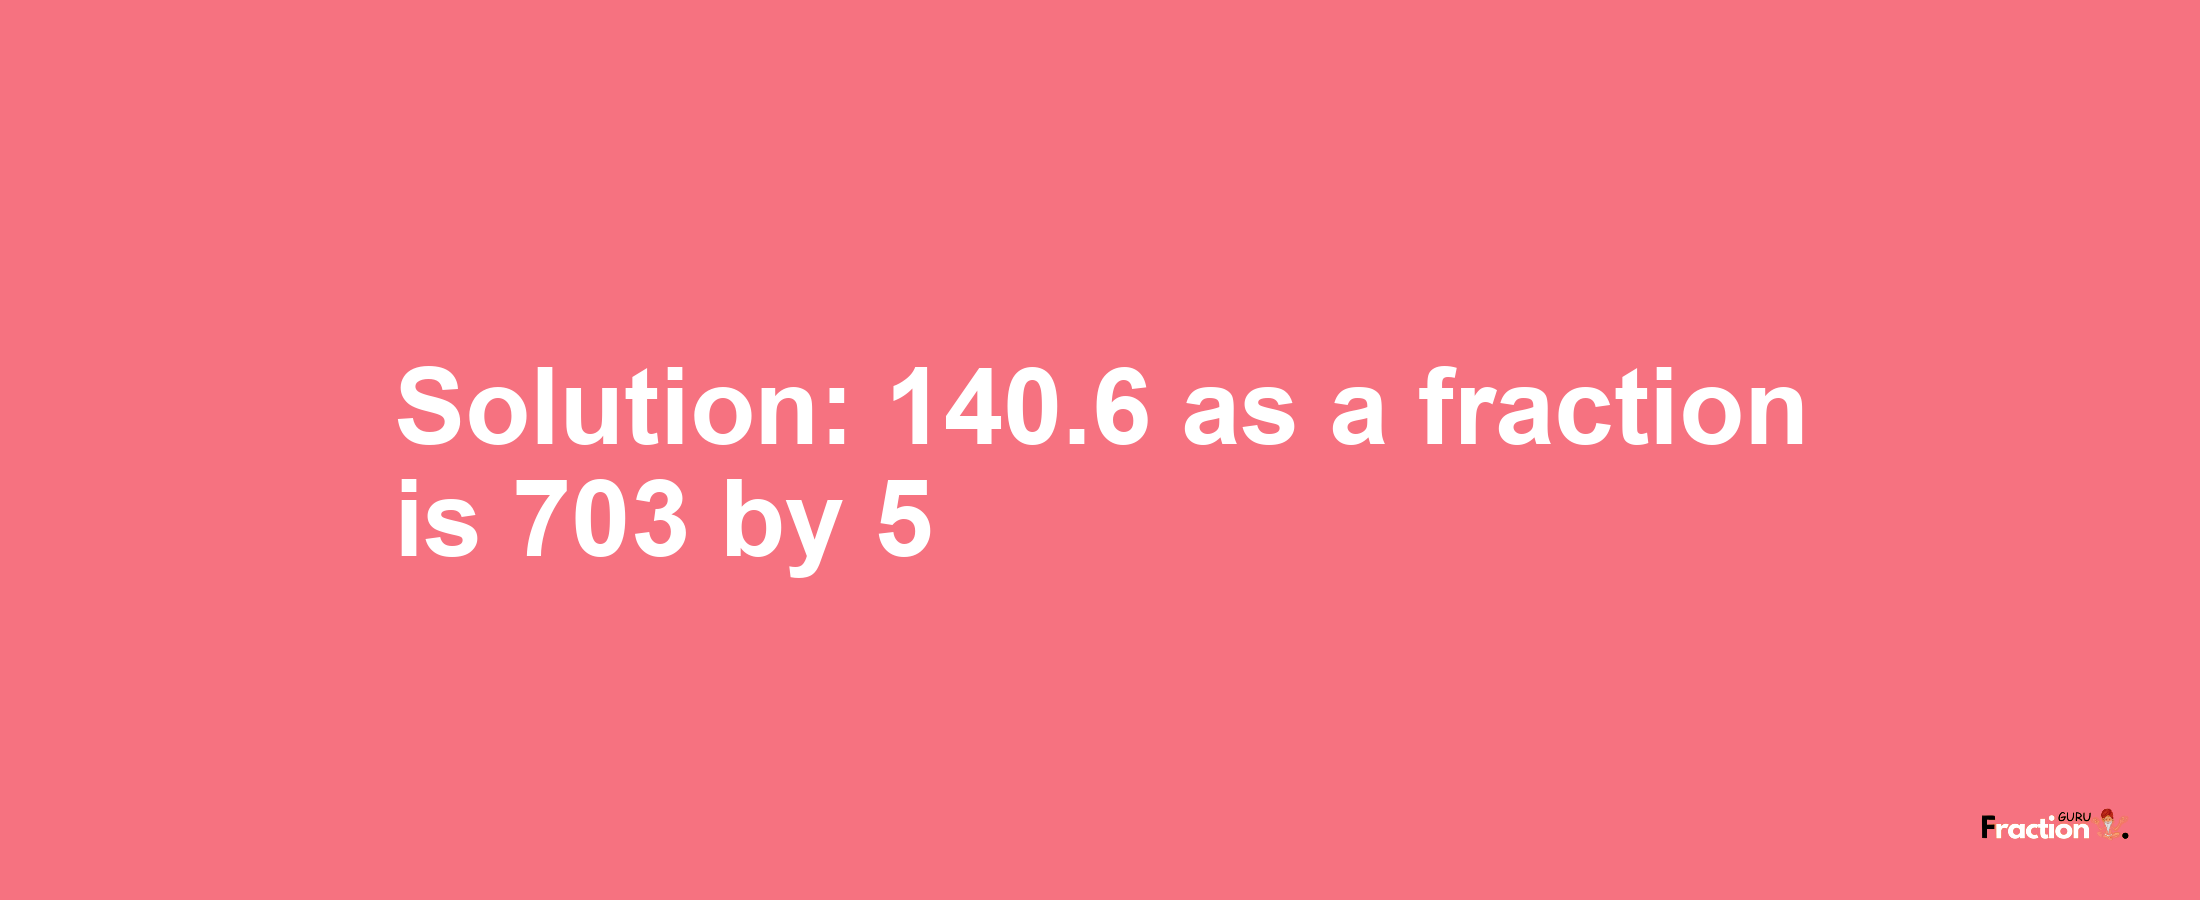 Solution:140.6 as a fraction is 703/5